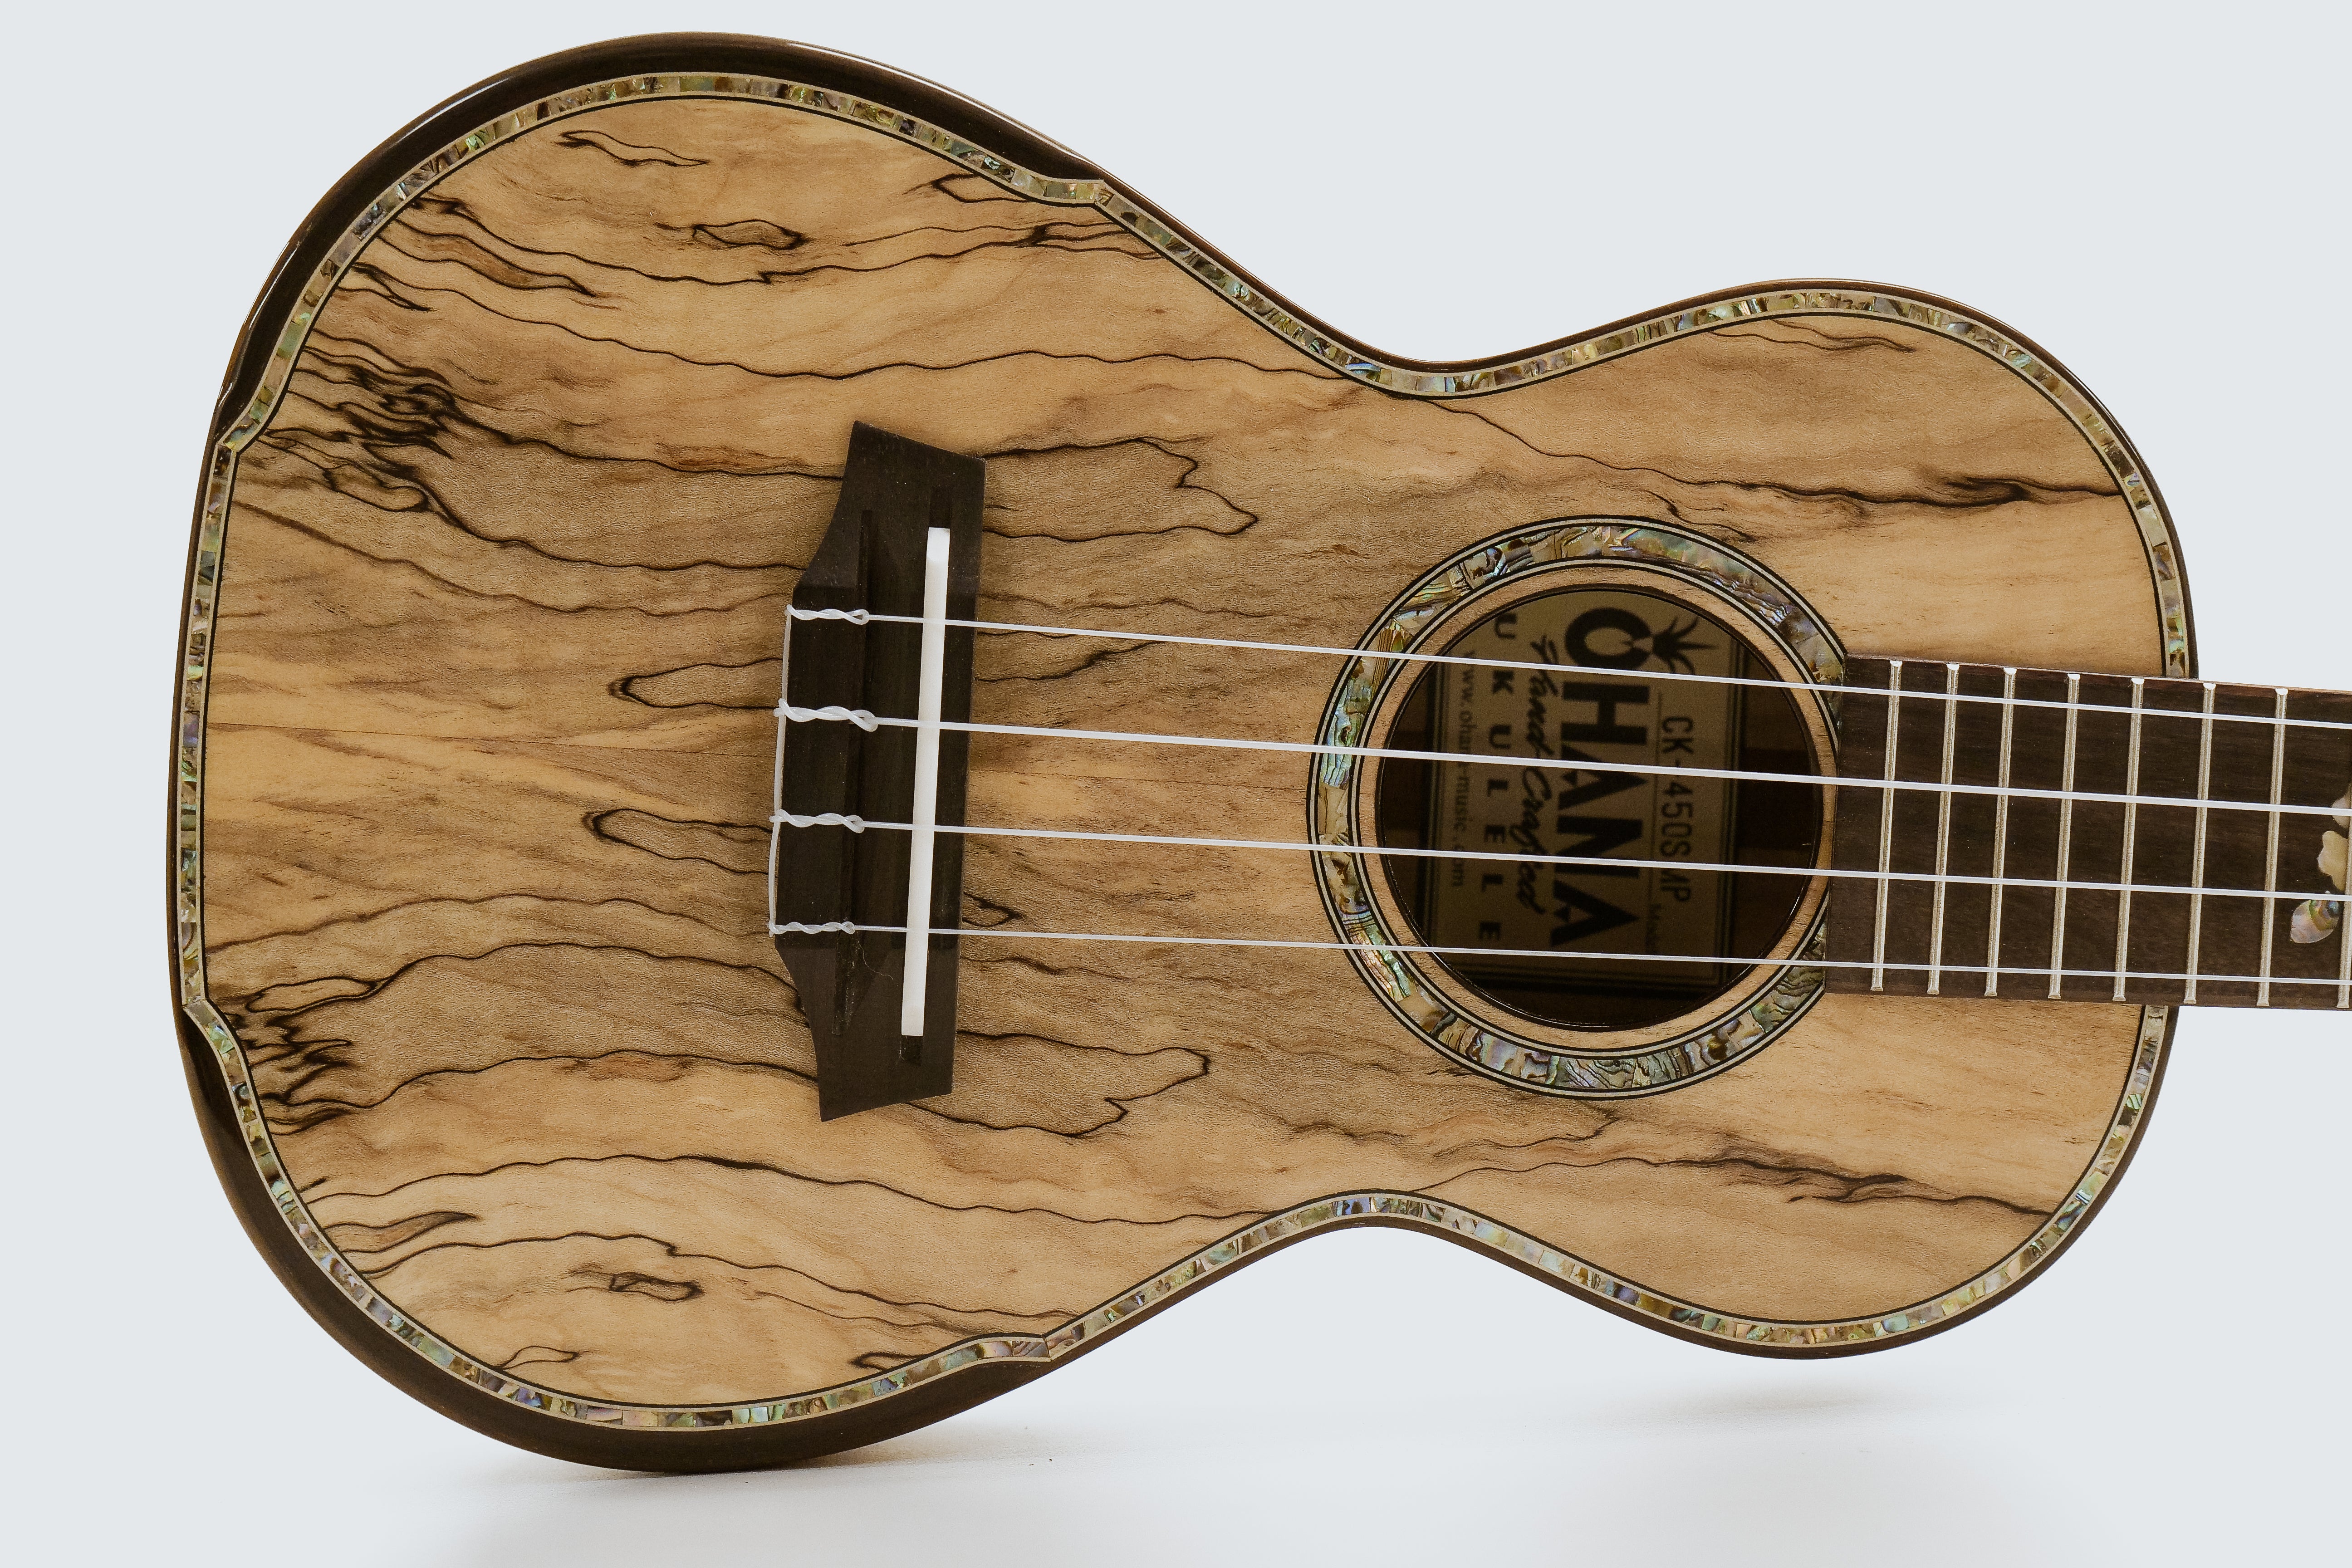 Ohana CK-450-SMP Solid Spalted Maple Concert Ukulele  "MIRAVE" LIMITED EDITION